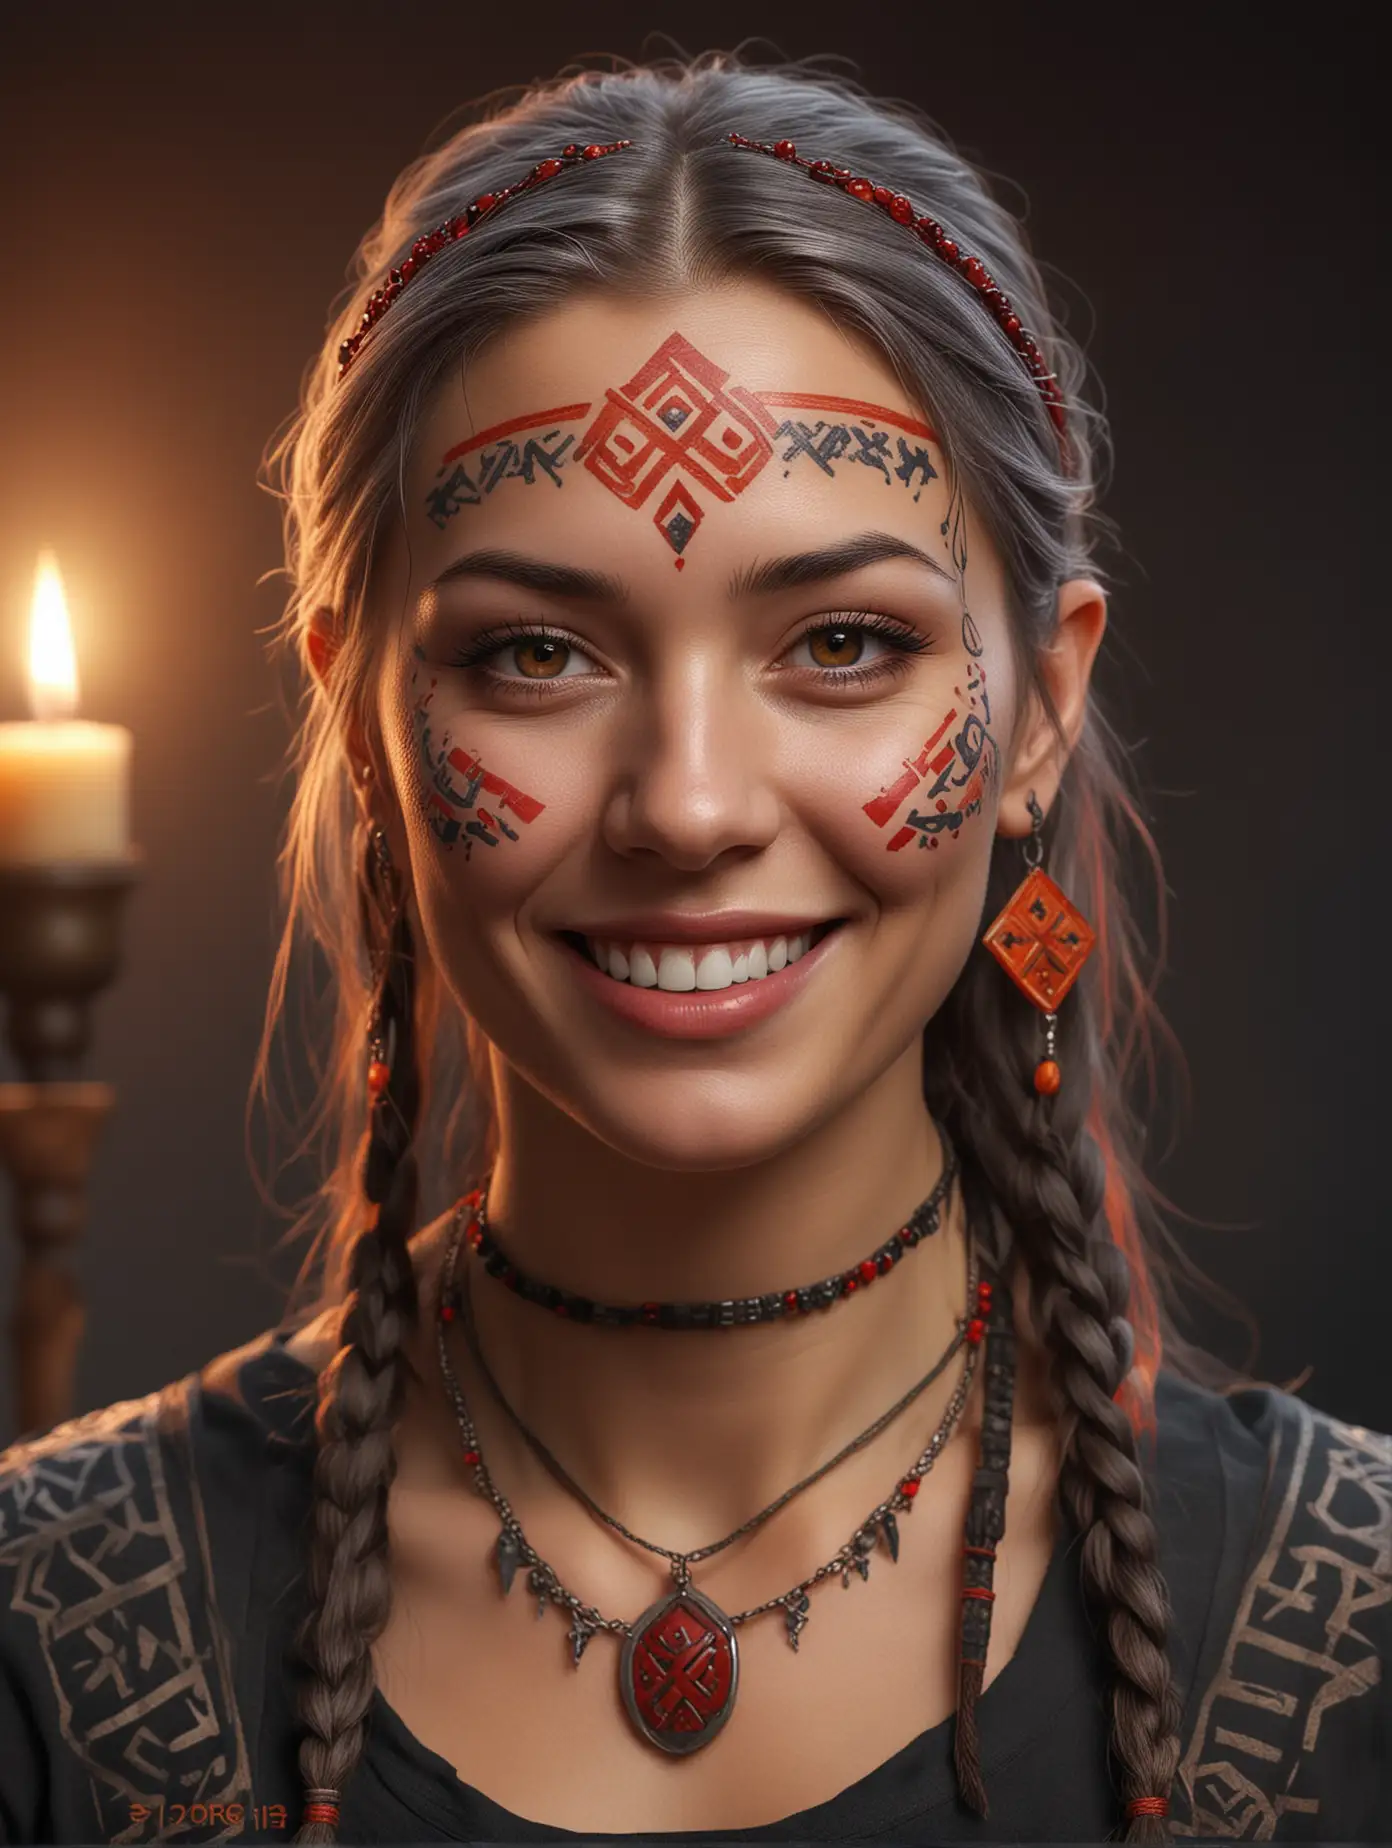 A portrait of a nice smiling younger female nordic shaman with red runic tattoos in face, a very dark reddish and grey hair wearing a dark tunic, adorned with red and orange gems and many golden runic signs : 1.
| candles and lanterns : 1.
| forge workshop in the back : 1.
| Very detailed, sunset, nordic atmosphere : 1.
| Highly detailed,high precision,focus on textures, hyperrealistic : 1.